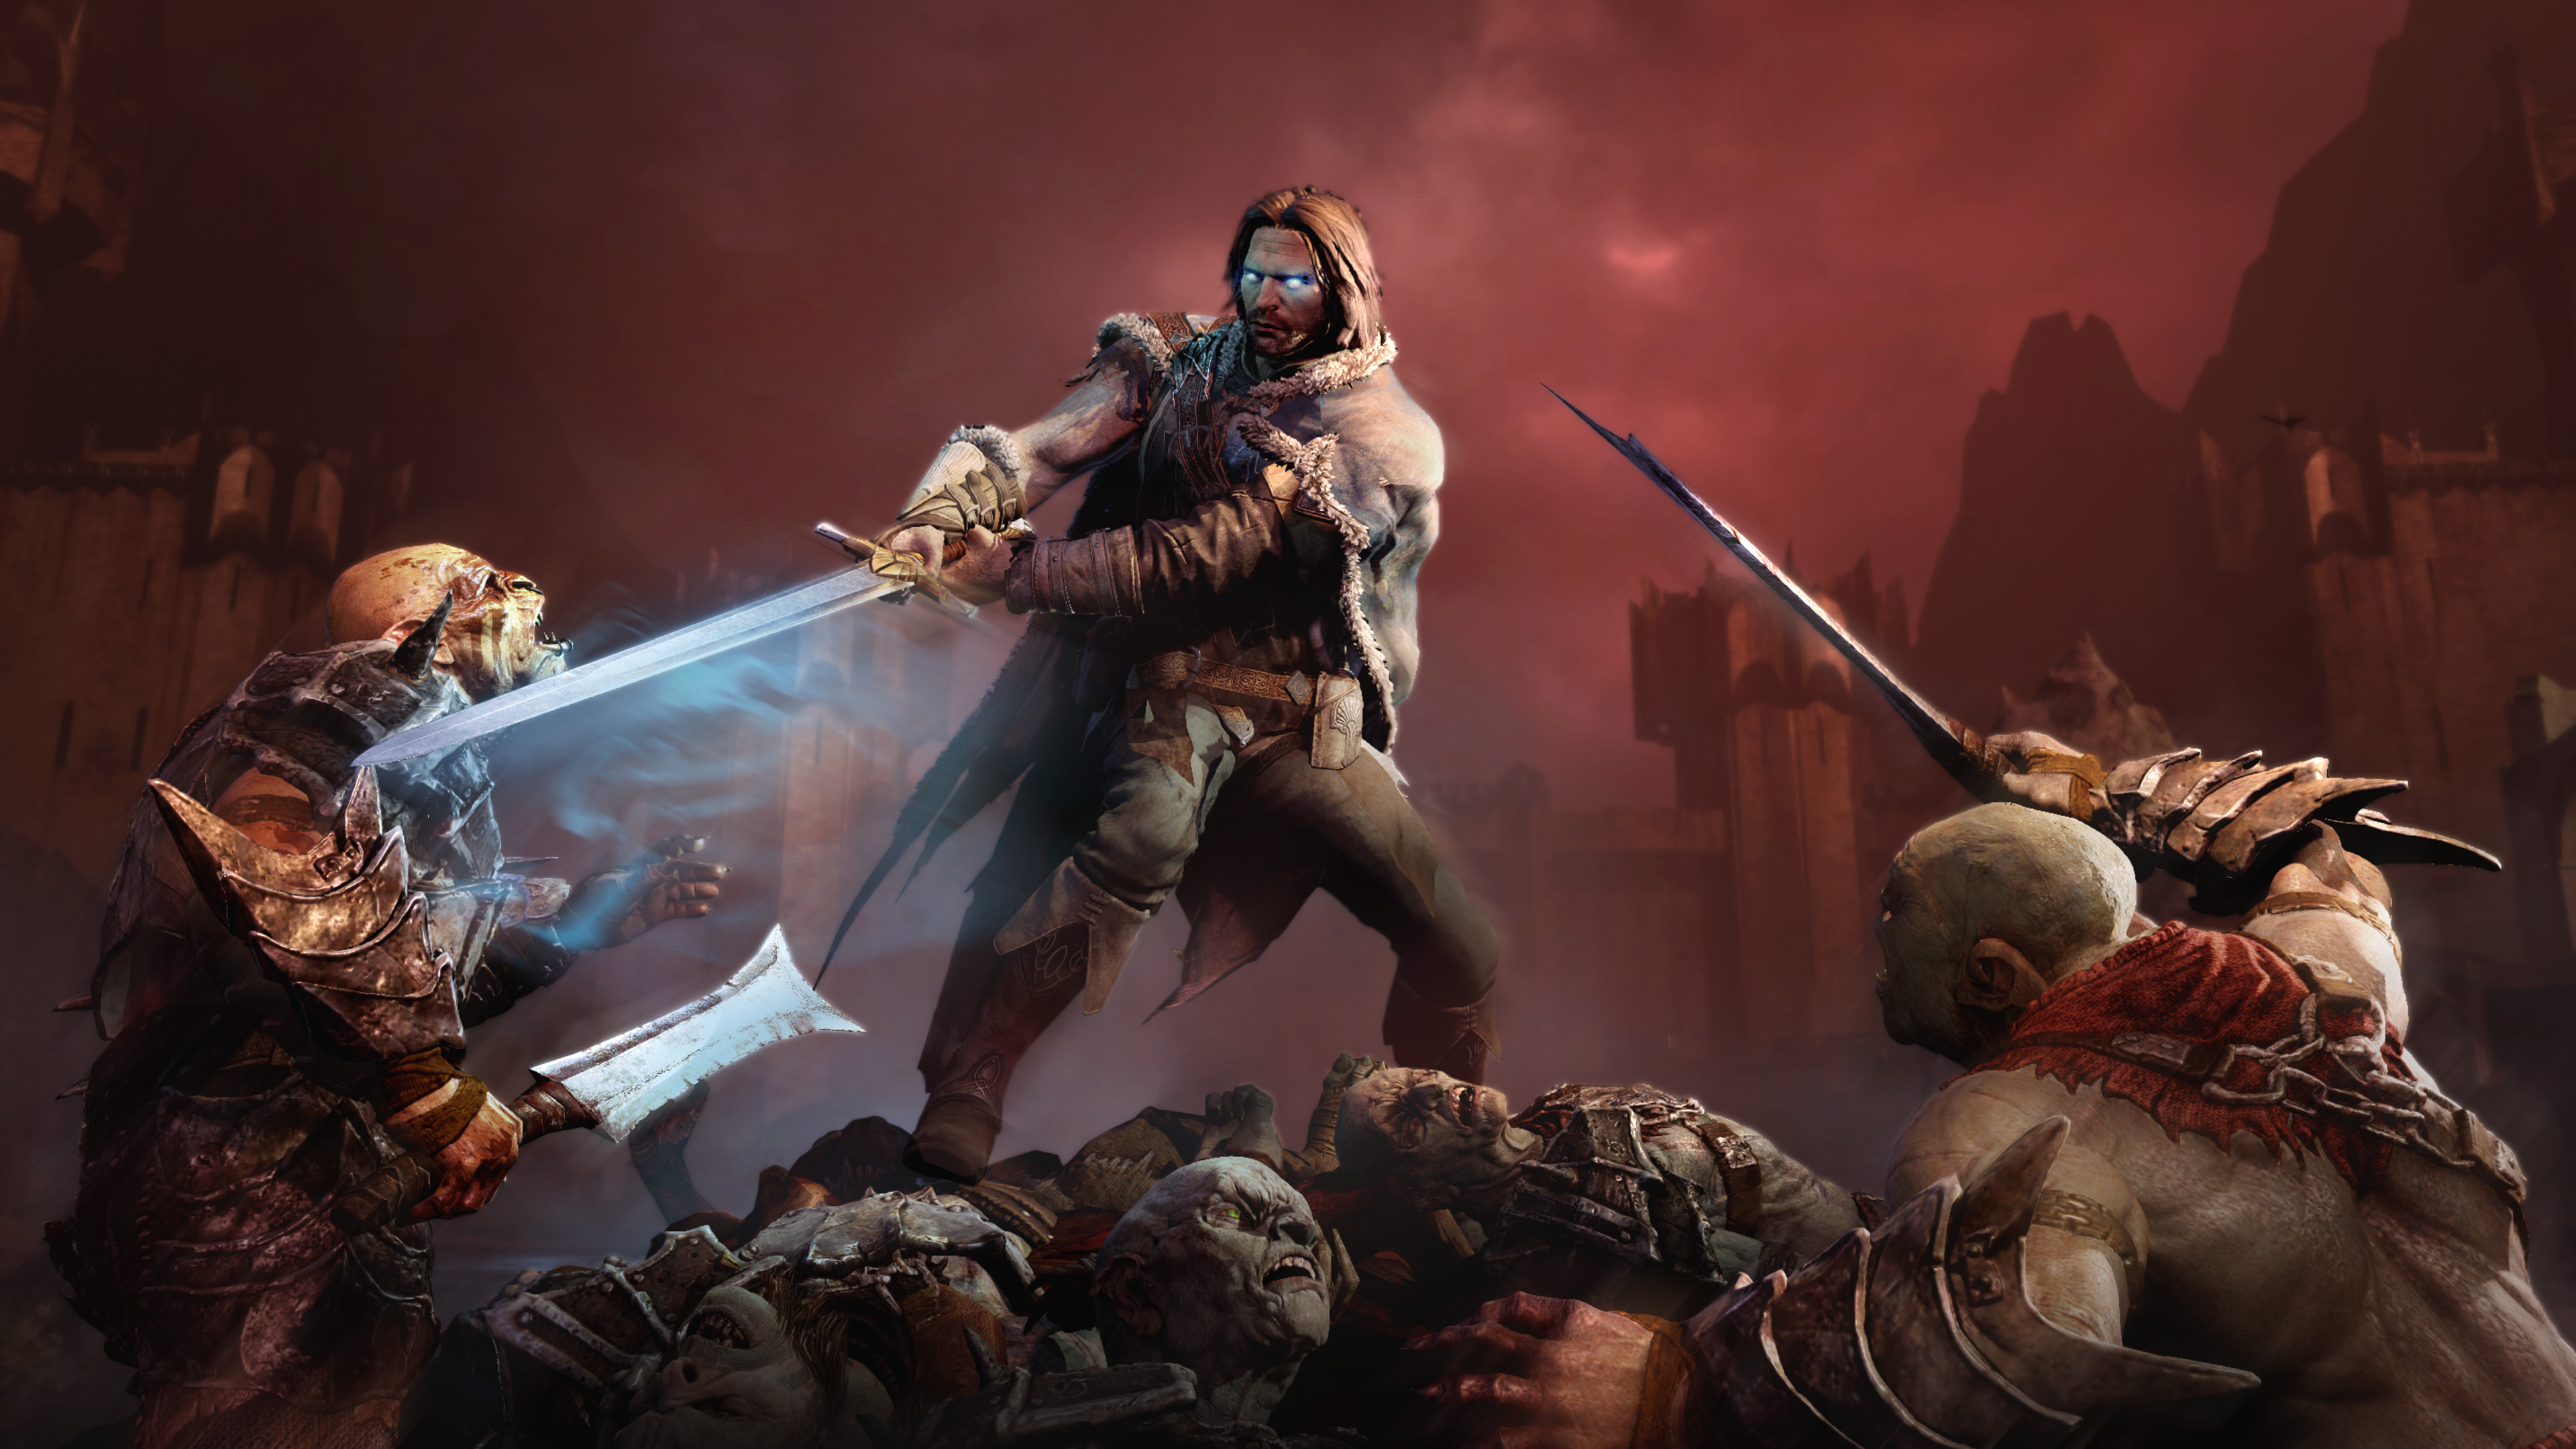 Brand new gameplay footage emerges for Shadow of Mordor